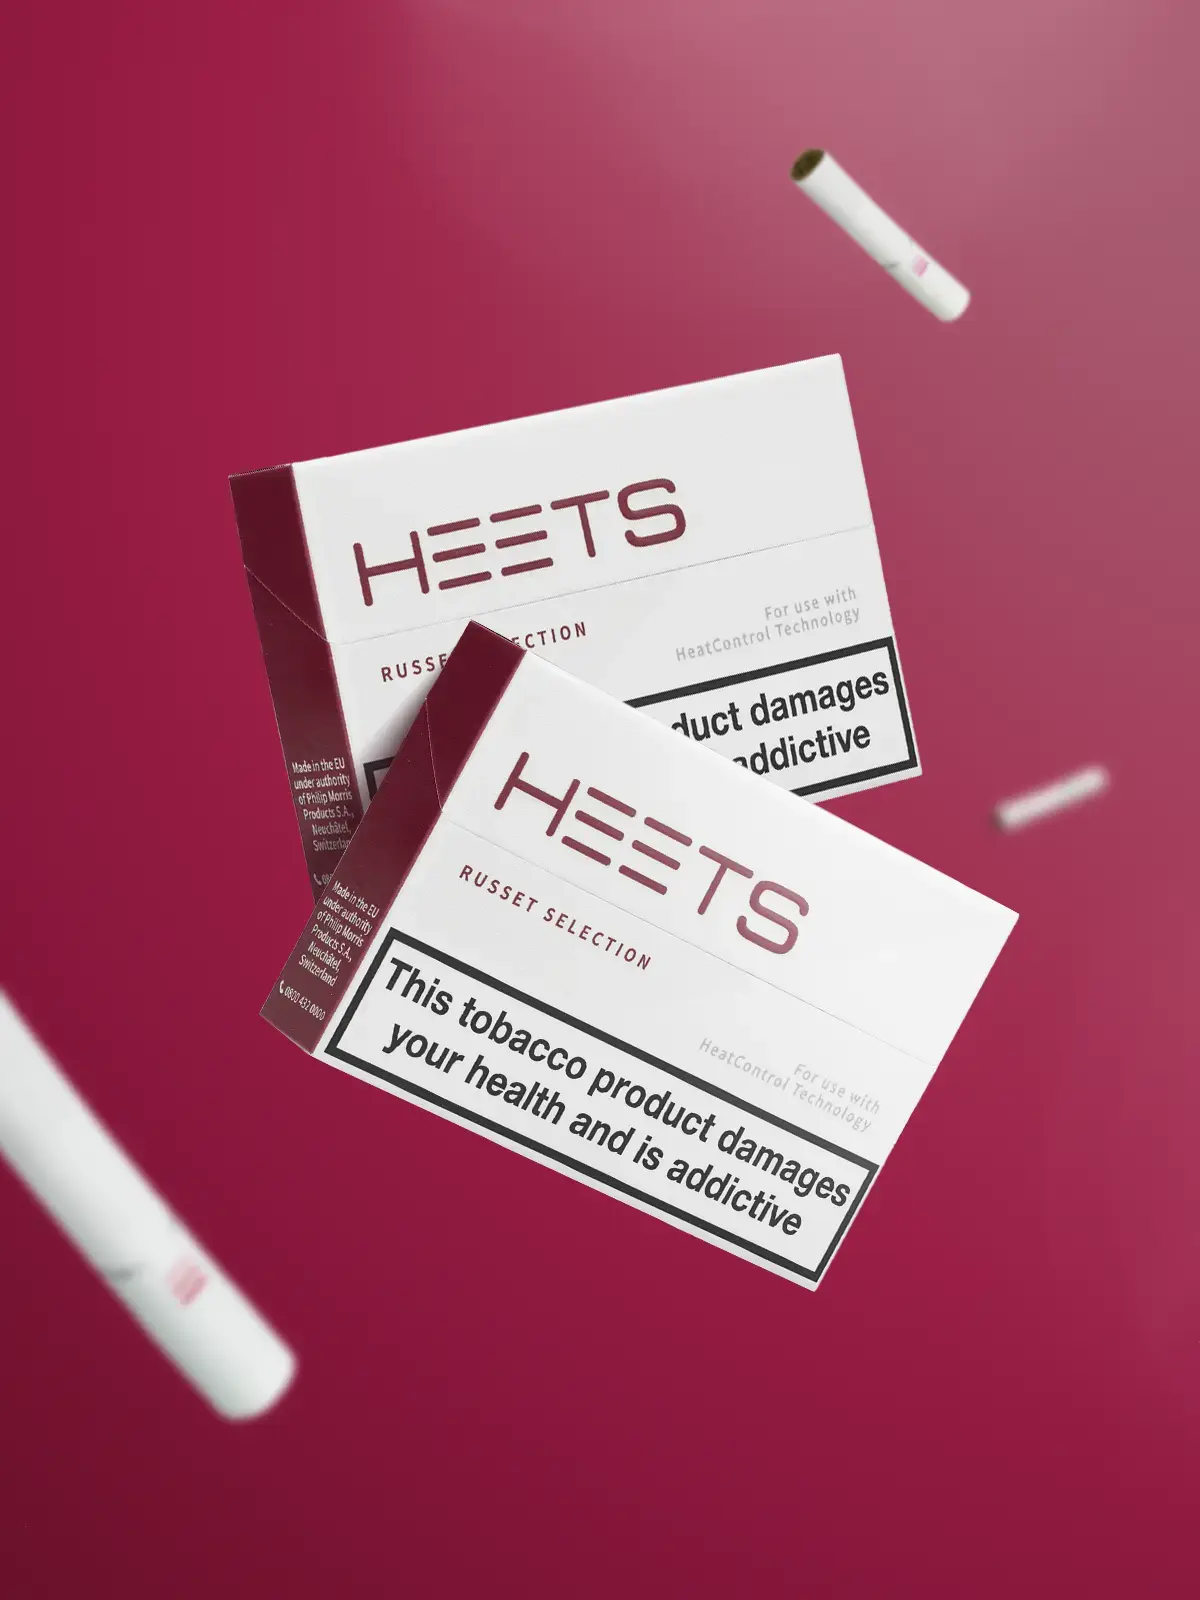 Two packs of IQOS HEETS in Russet flavour, floating in front of a burgandy coloured background